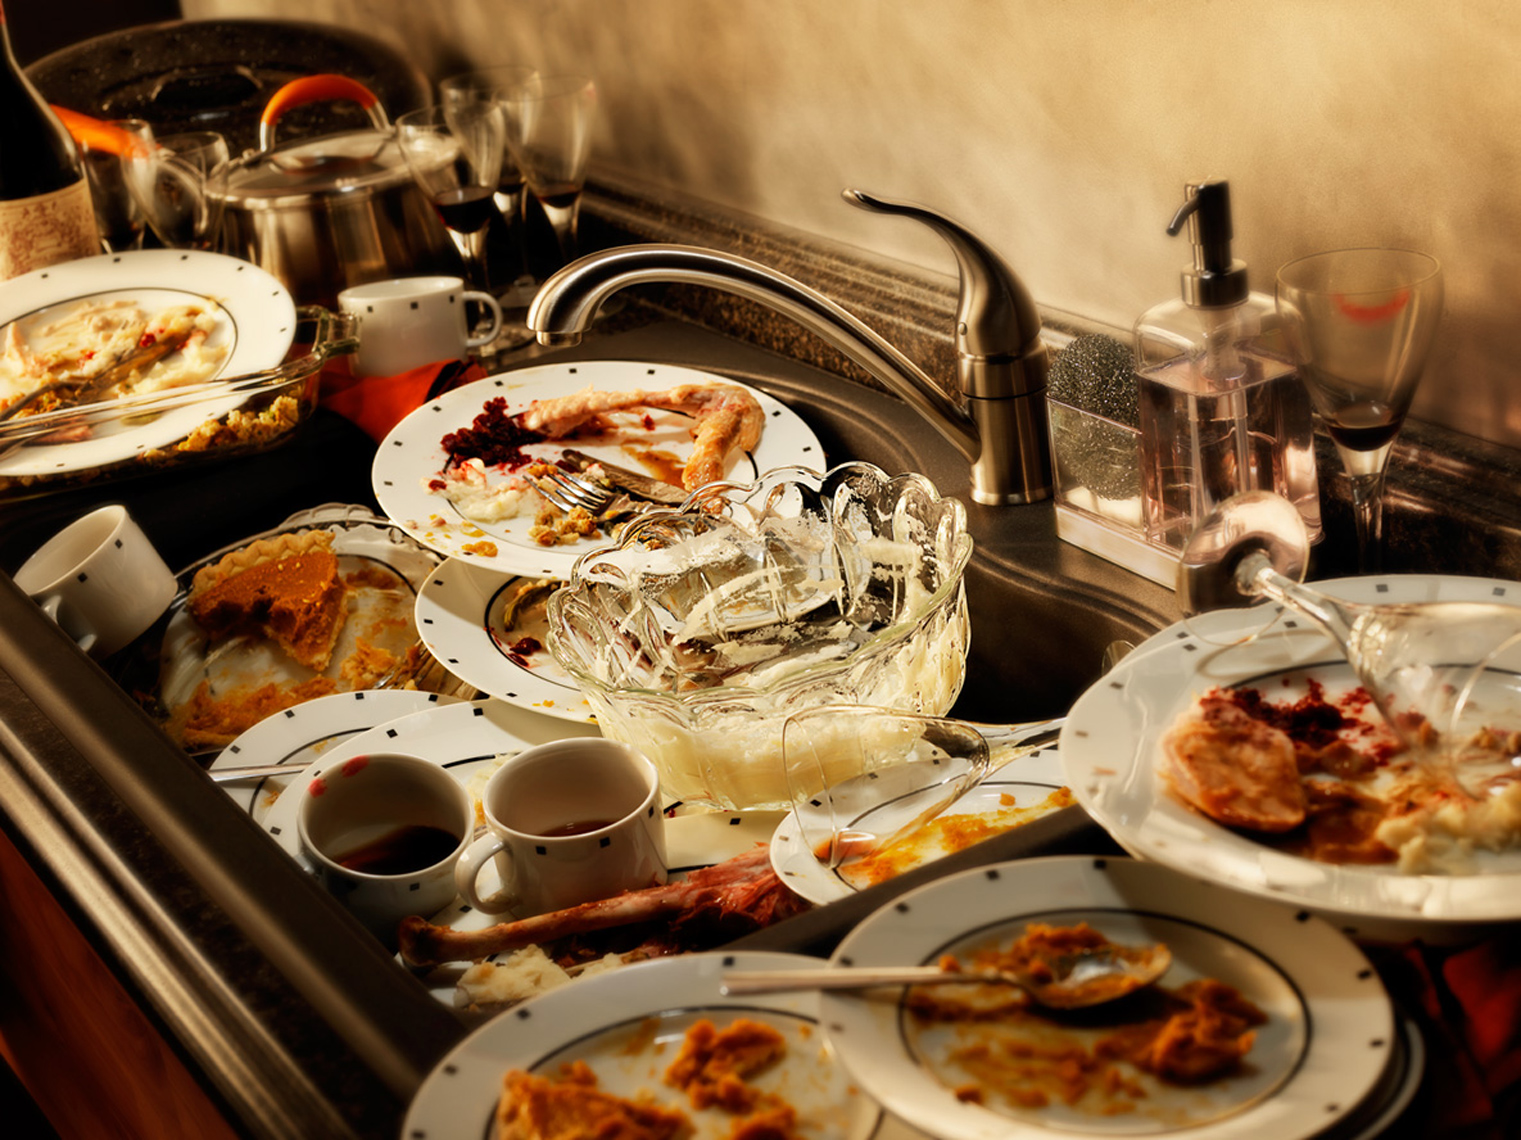 Dirty-Sink-of-Dishes-food-photography-studio-3